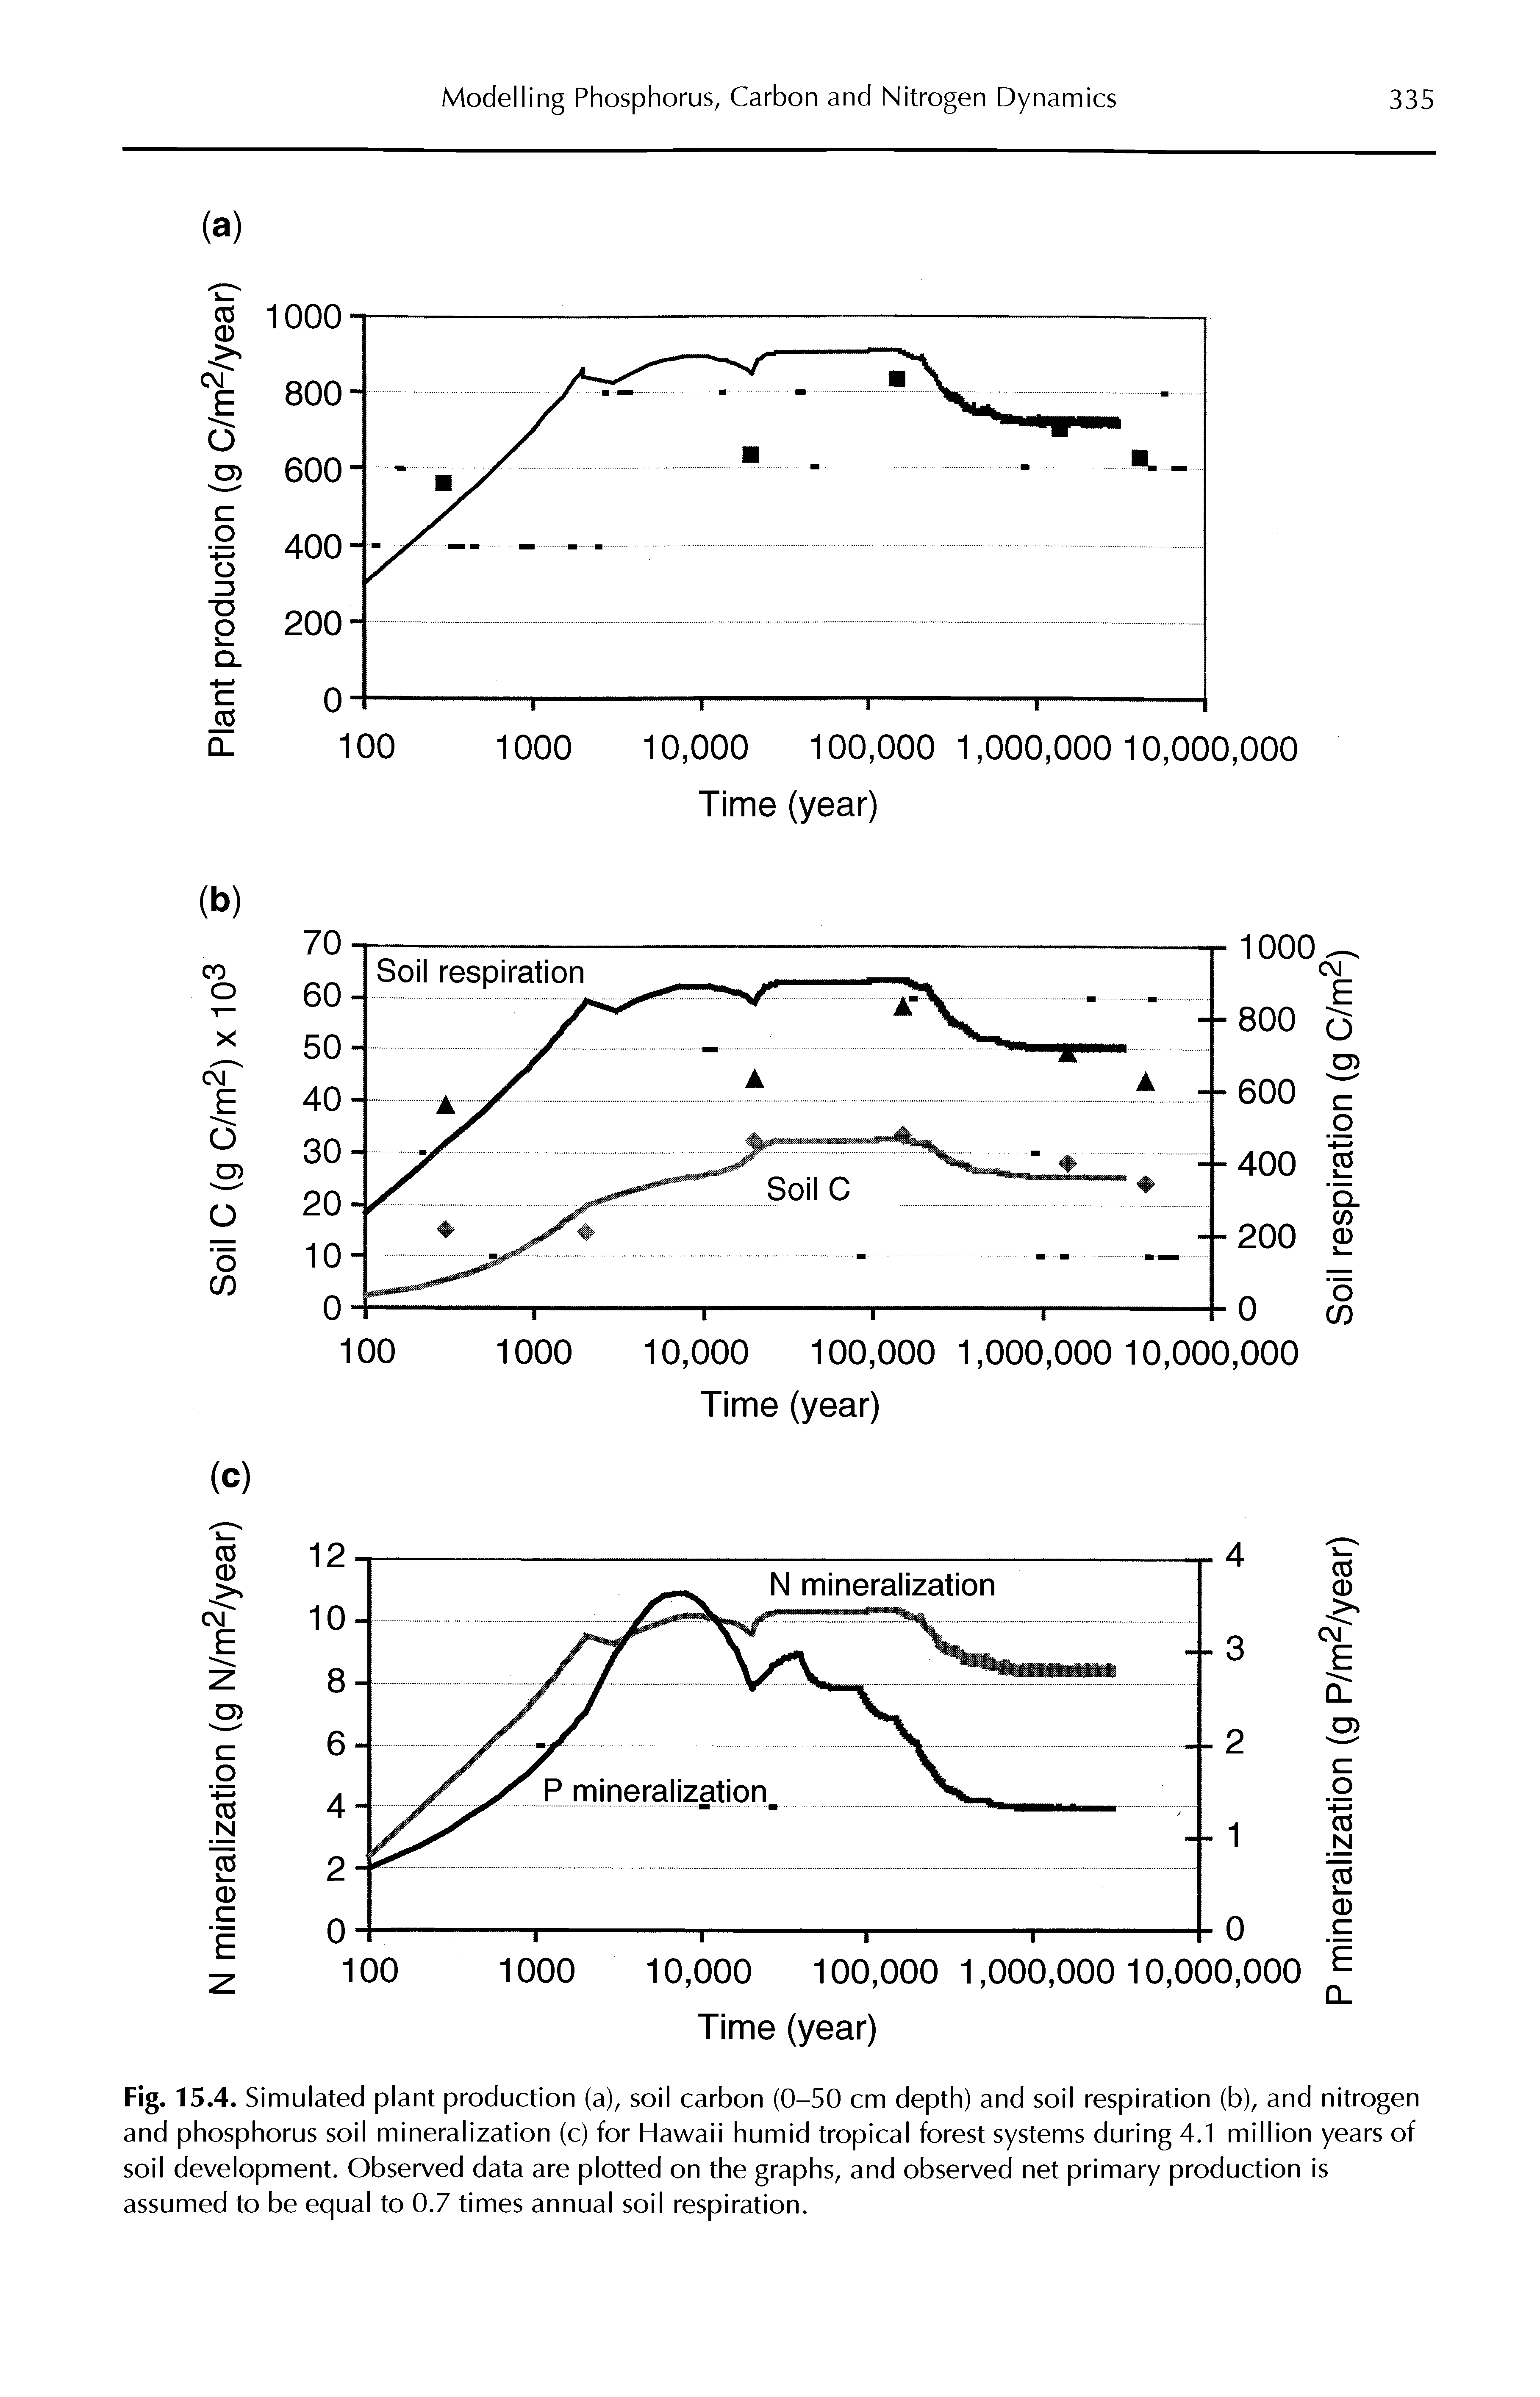 Fig. 15.4. Simulated plant production (a), soil carbon (0-50 cm depth) and soil respiration (b), and nitrogen and phosphorus soil mineralization (c) for Hawaii humid tropical forest systems during 4.1 million years of soil development. Observed data are plotted on the graphs, and observed net primary production is assumed to be equal to 0.7 times annual soil respiration.